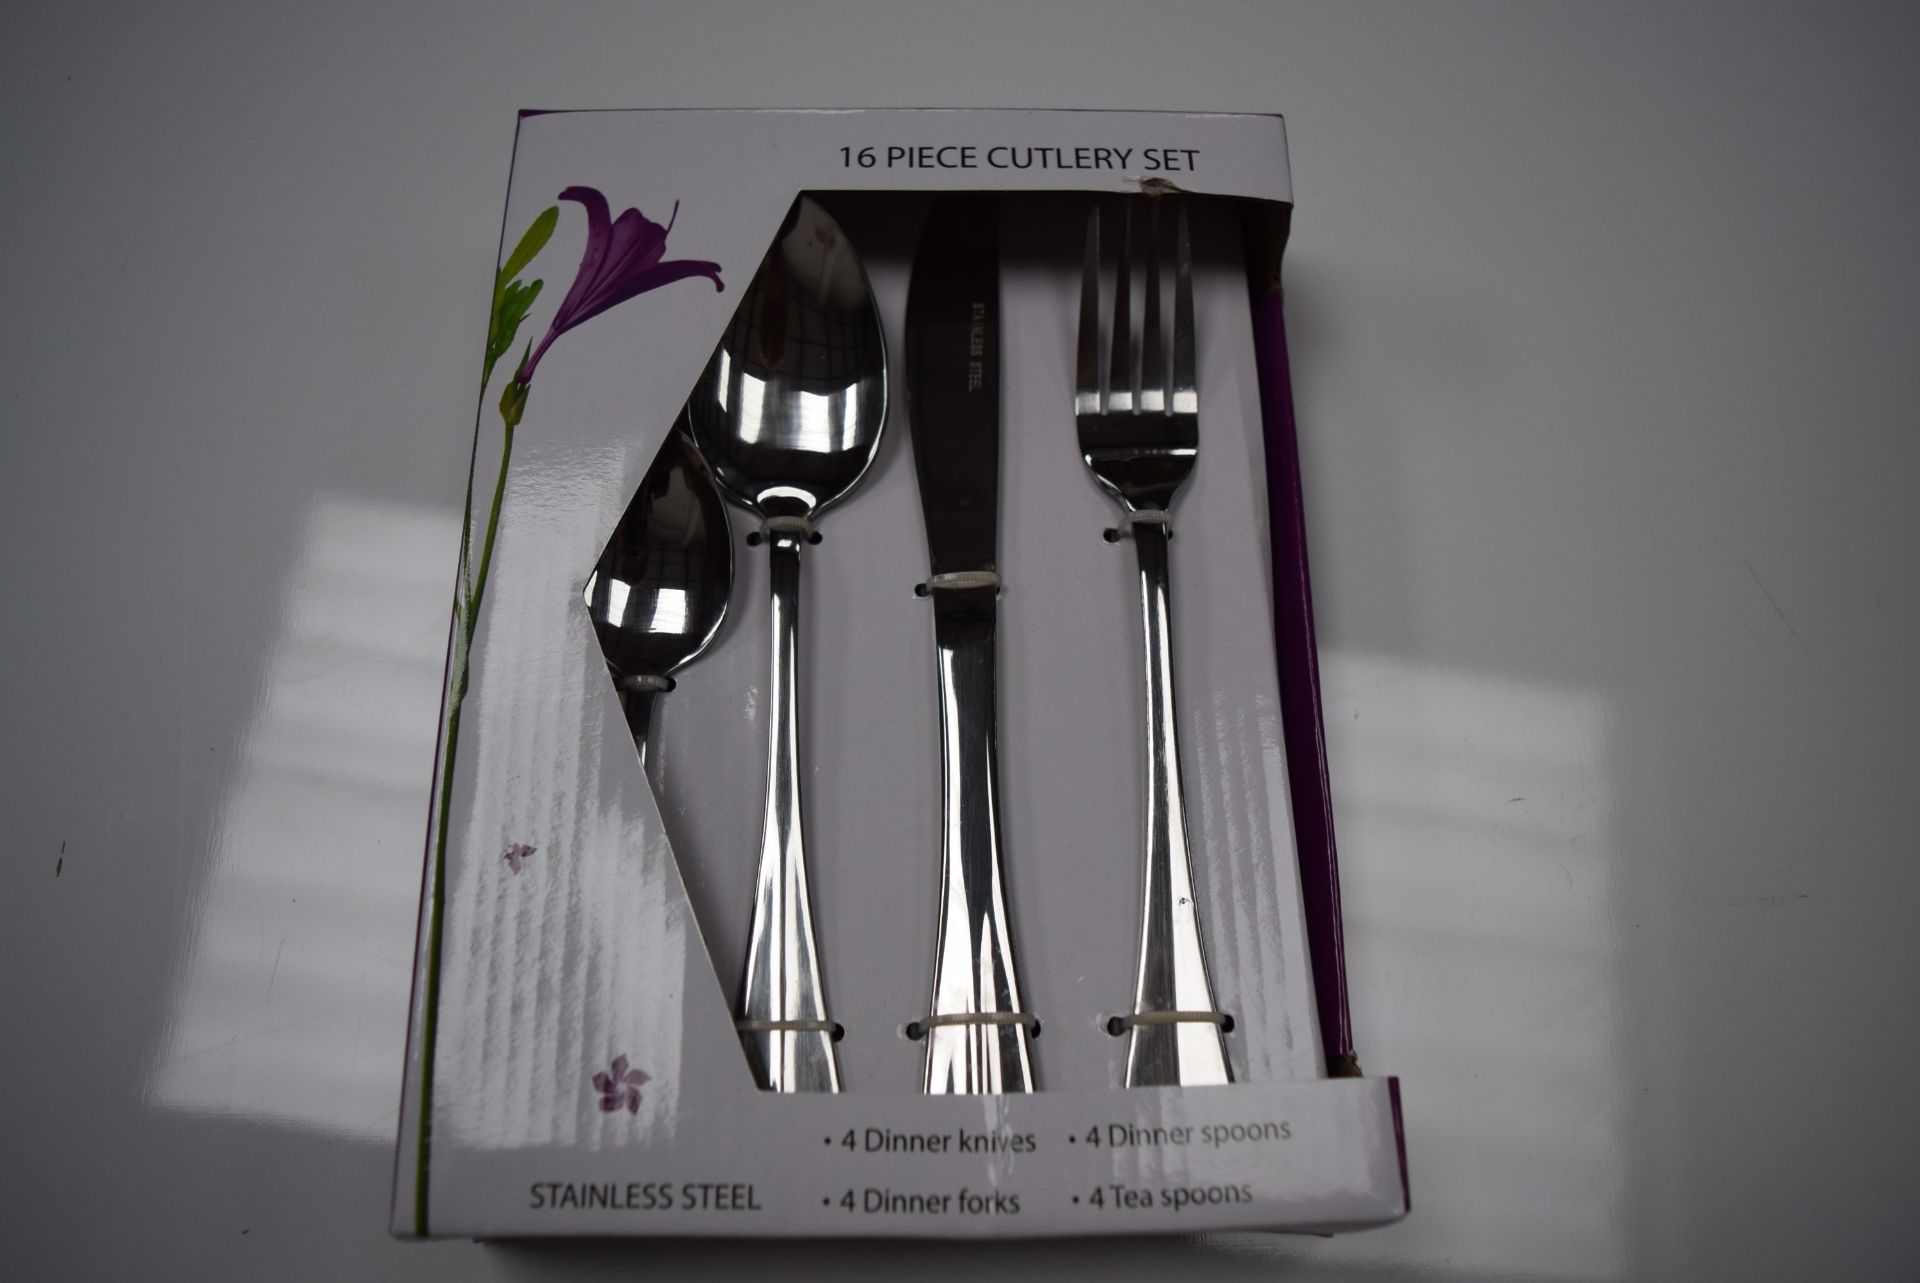 1 X BOXED BRAND NEW 16 PIECE CUTLERY SET